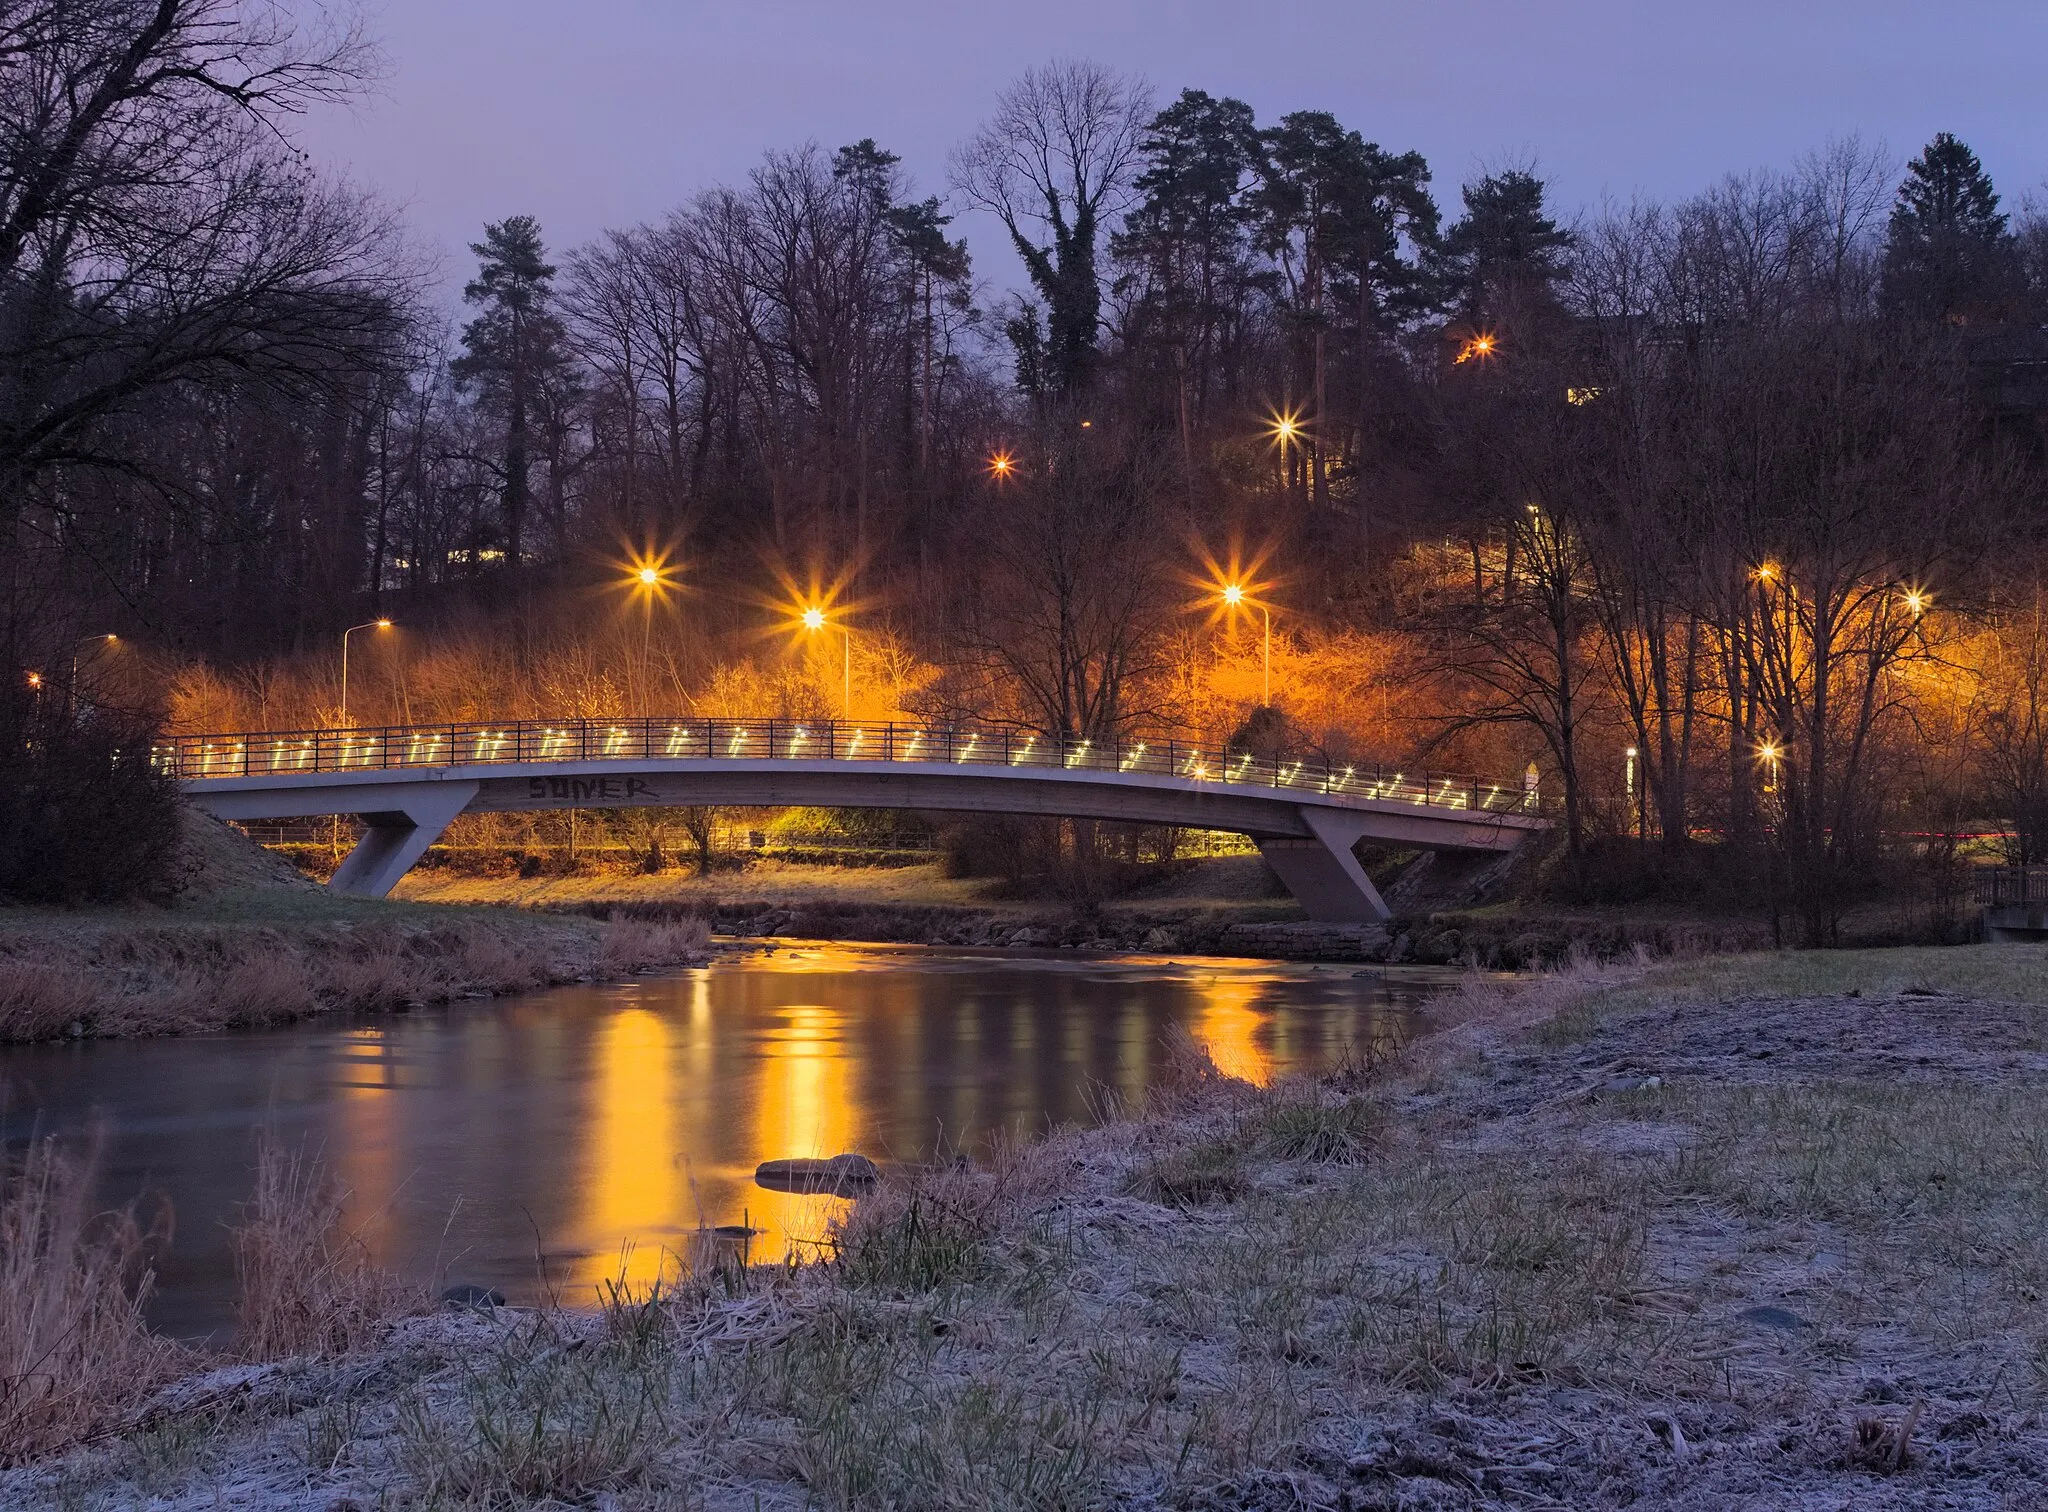 Photo showing: The Werdsteg is a foot and bicycle bridge crossing the Sihl river in Adliswil.  The picture shows it with lights still on during dawn.